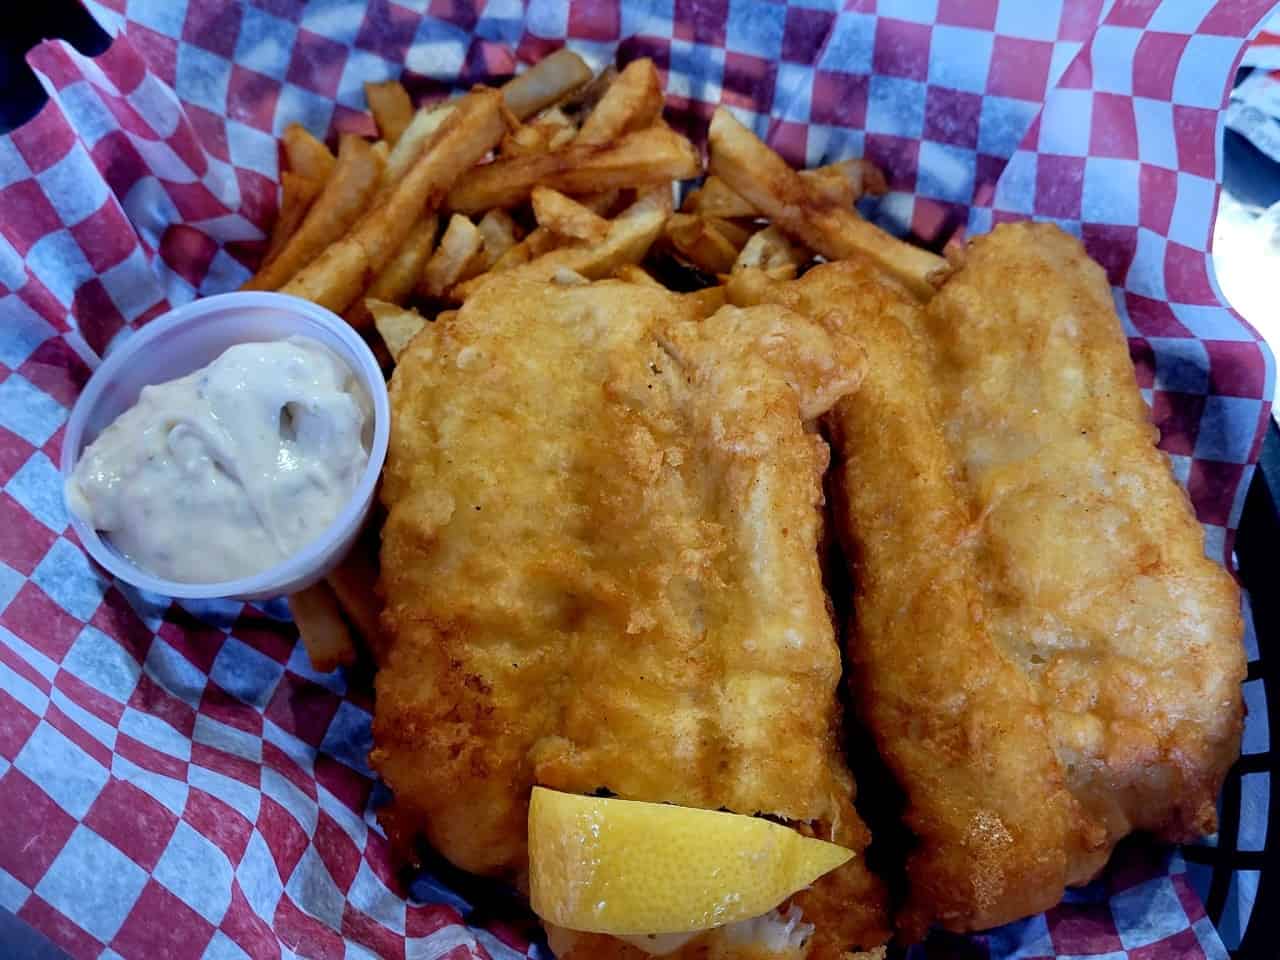 Shorty's Diner, Crossfield, Alberta 2022-05-14 - Delicious Fish & Chips at Shorty's Diner 